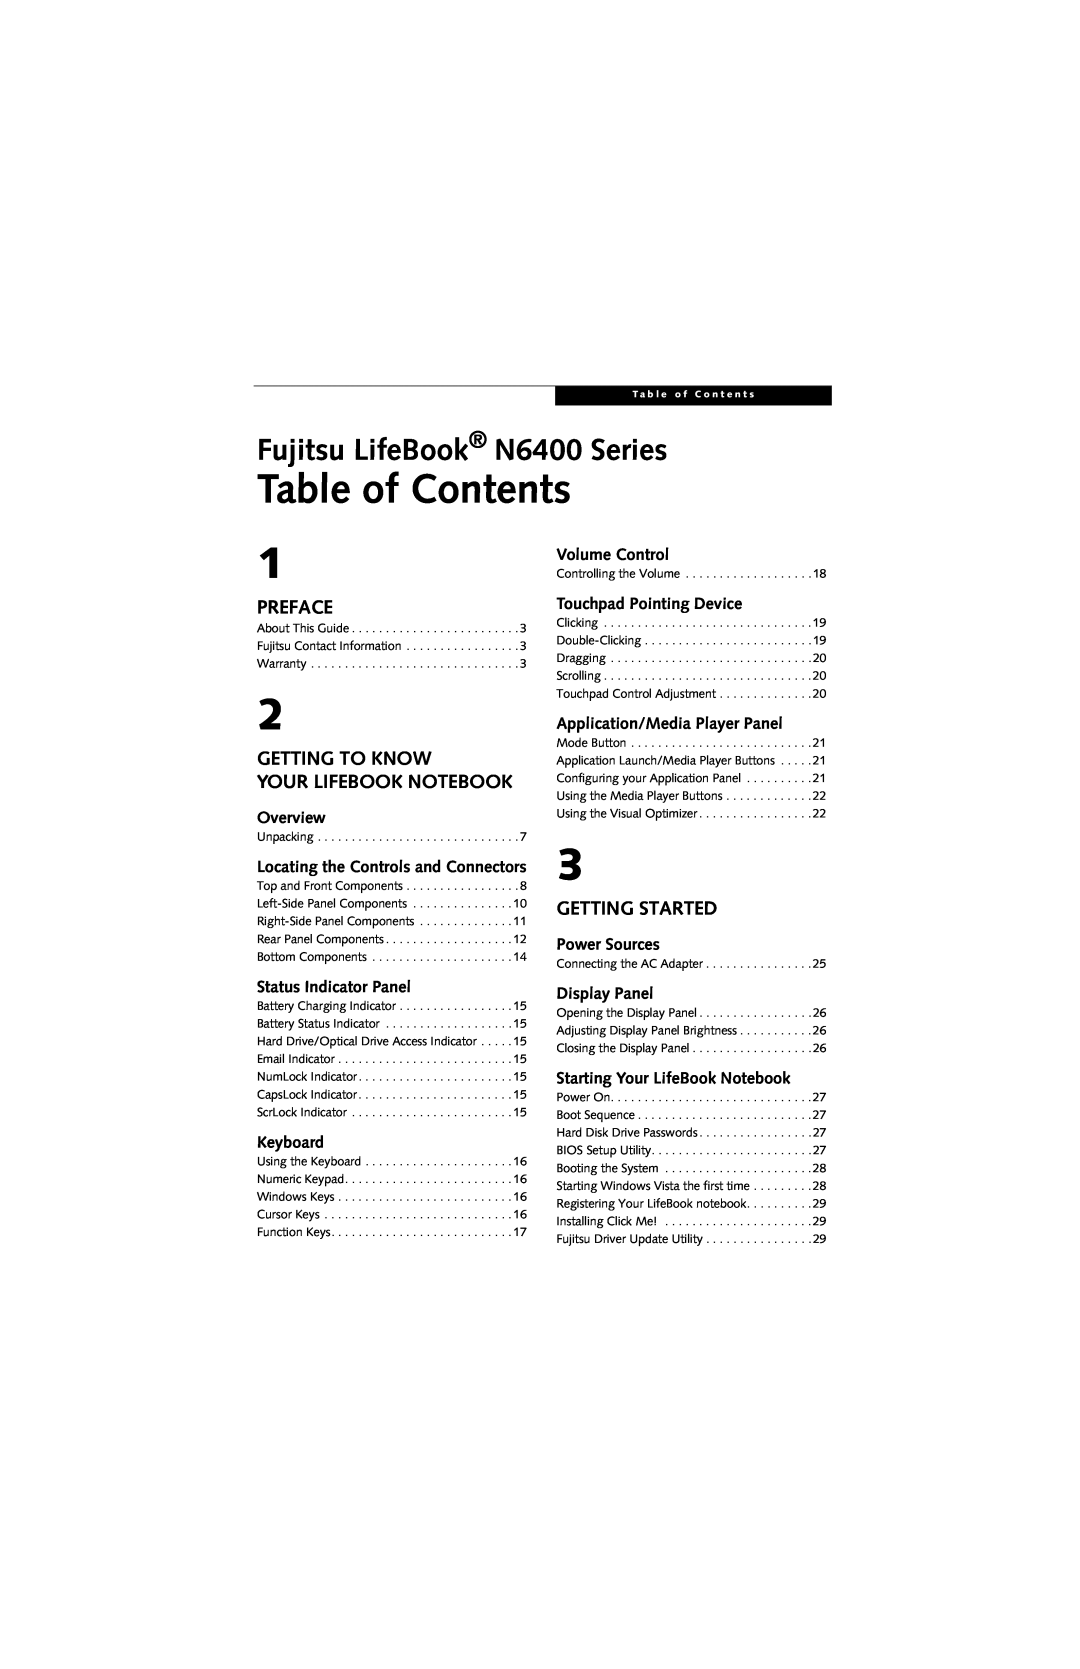 Fujitsu N6460 Table of Contents, Preface, Getting To Know Your Lifebook Notebook, Getting Started, Overview, Keyboard 